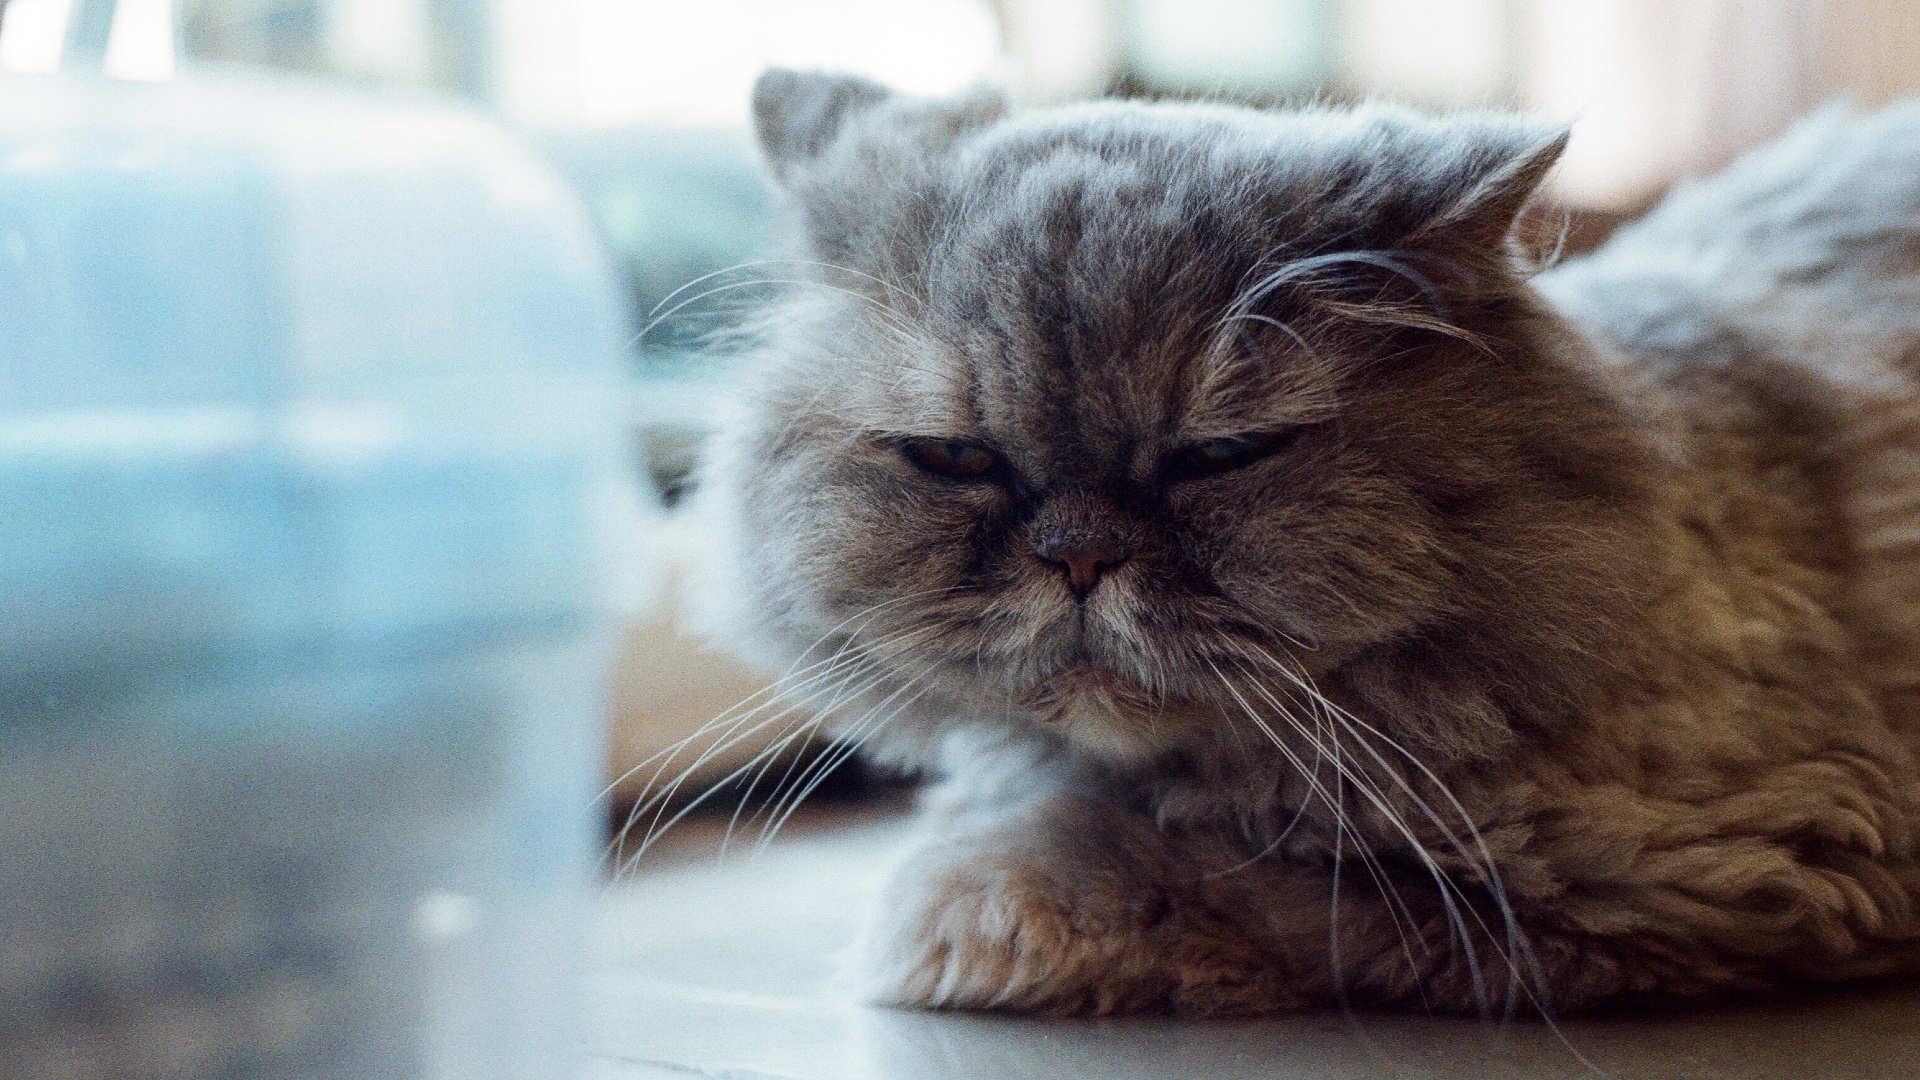 Signs That Your Cat Is Mad at You, According to Animal Behaviorist